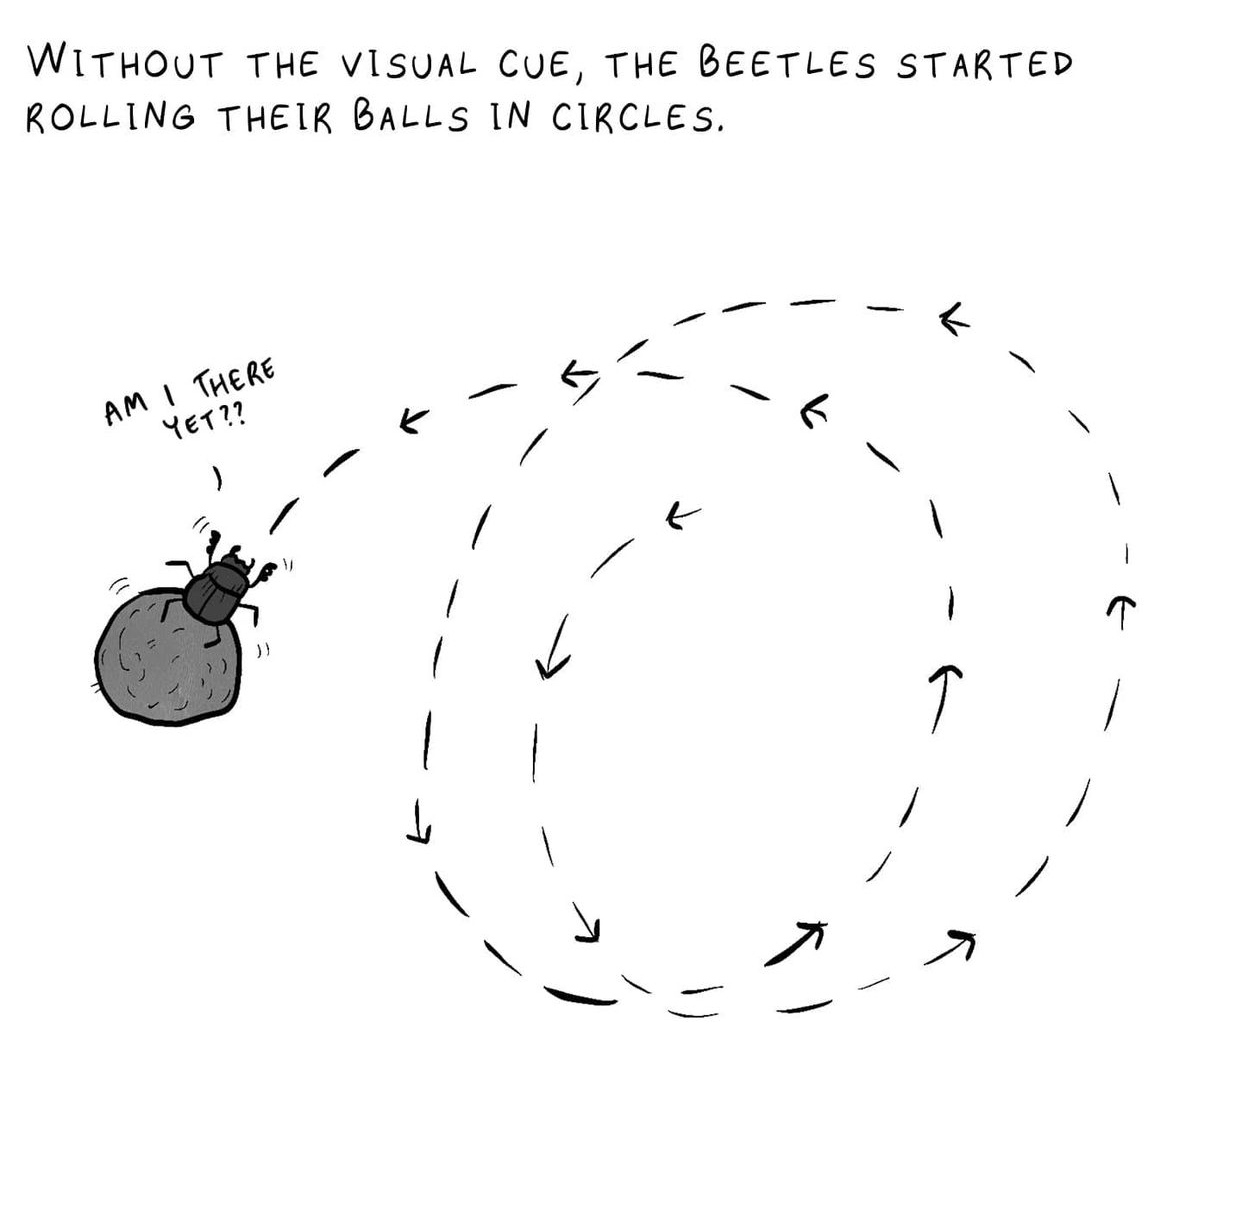 Drawing of beetle on poo pile, far away with track showing it moving in circles.. says "without the visual cue, the beetles started rolling their balls in circles"